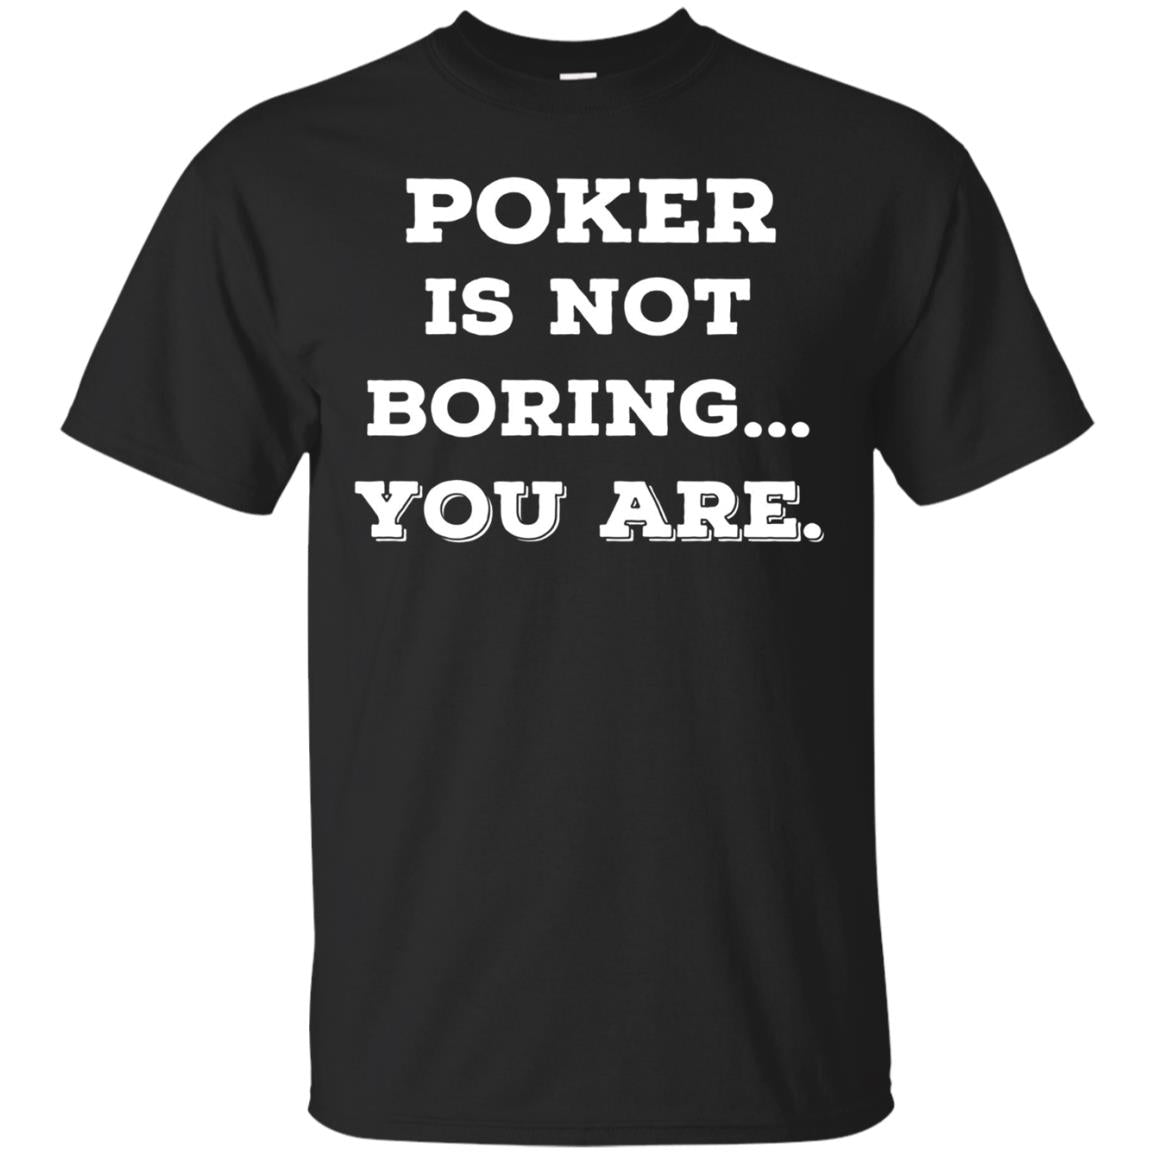 Best Poker T Shirts. Cool Funny Gifts For Poker Players.